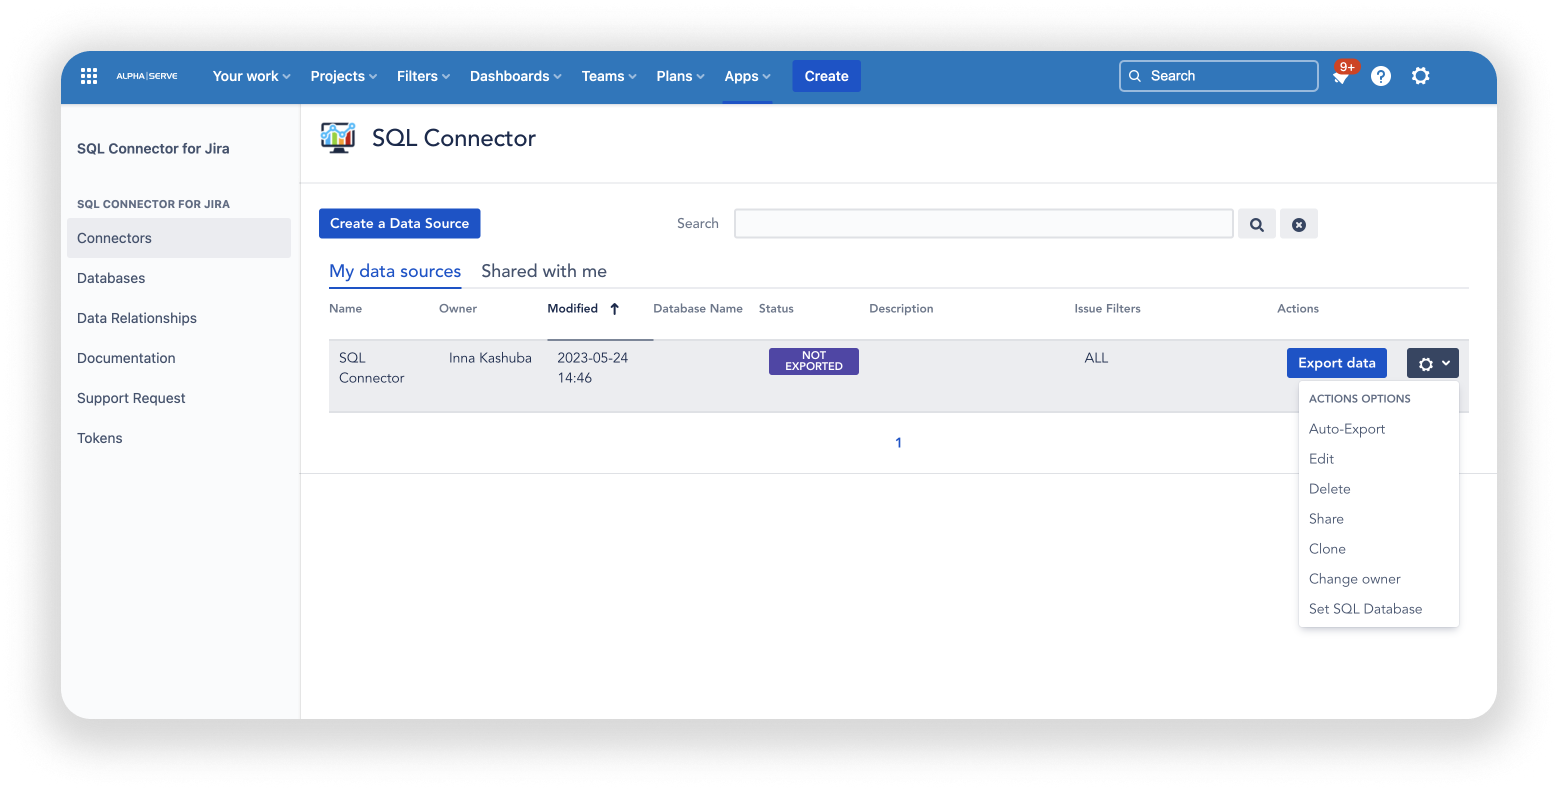 SQL Connector for Jira: Export Data Using Advanced Features